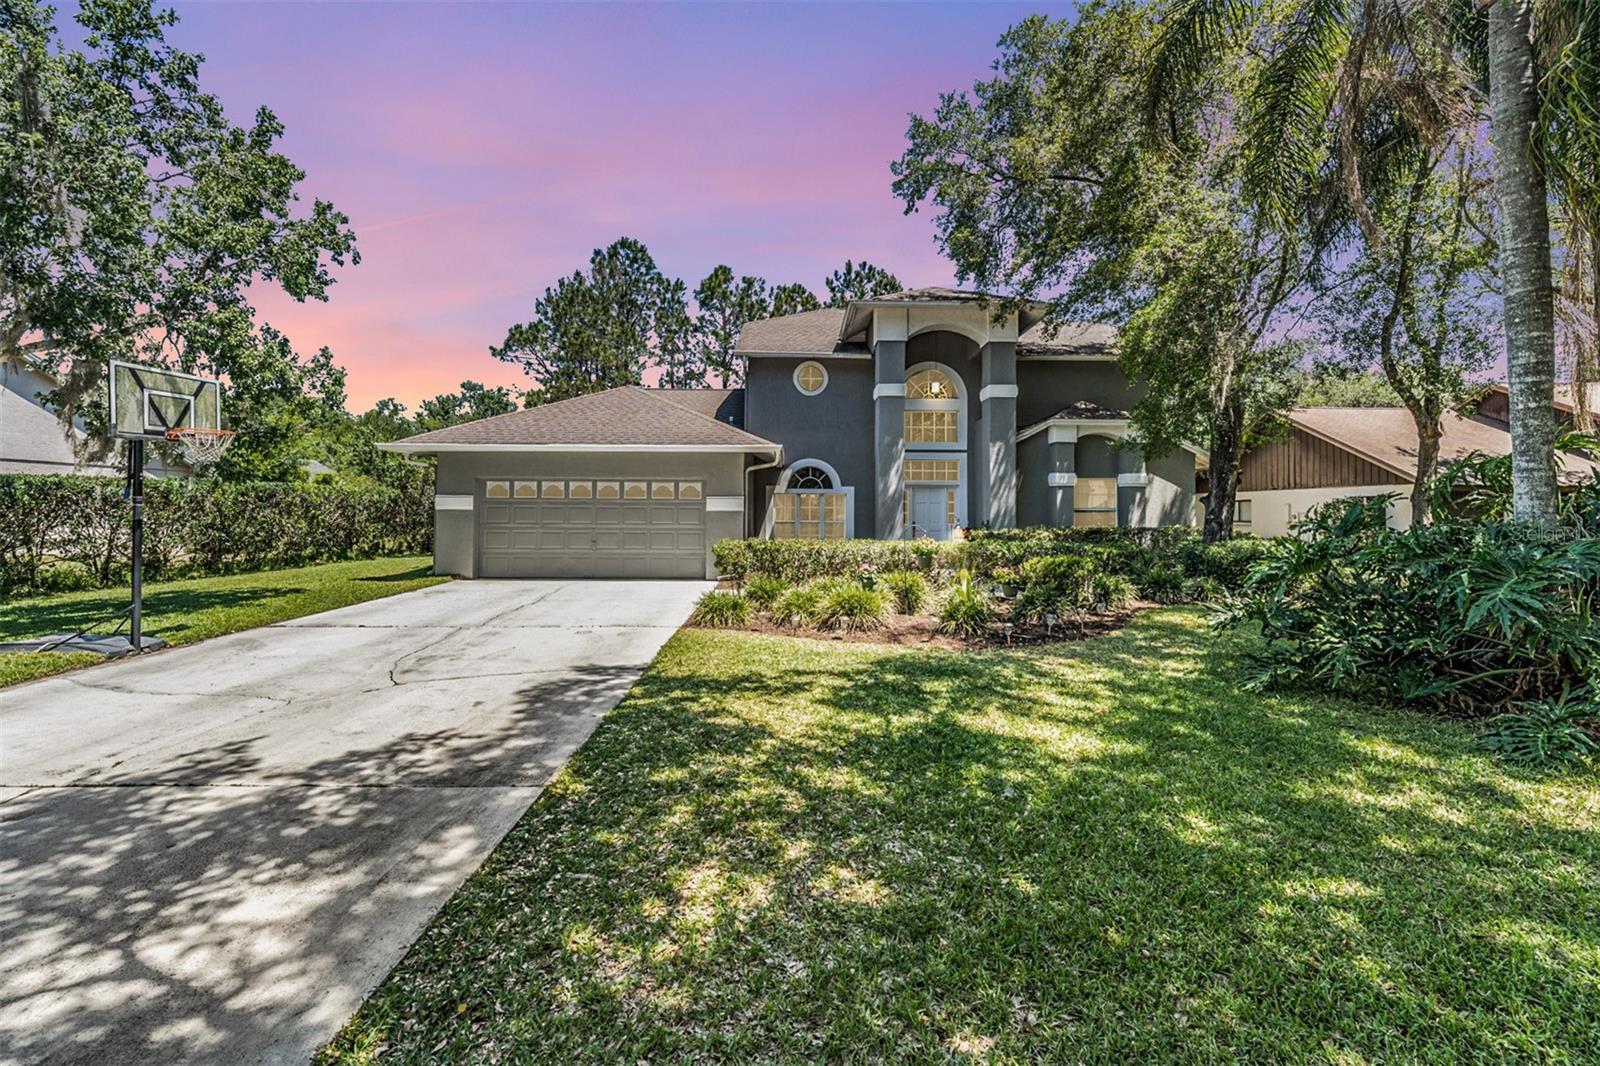 Front Exterior - 4 Bedrooms/3 Bathrooms/2 Car Garage Pool home with water access!  (3083 Sq Ft)